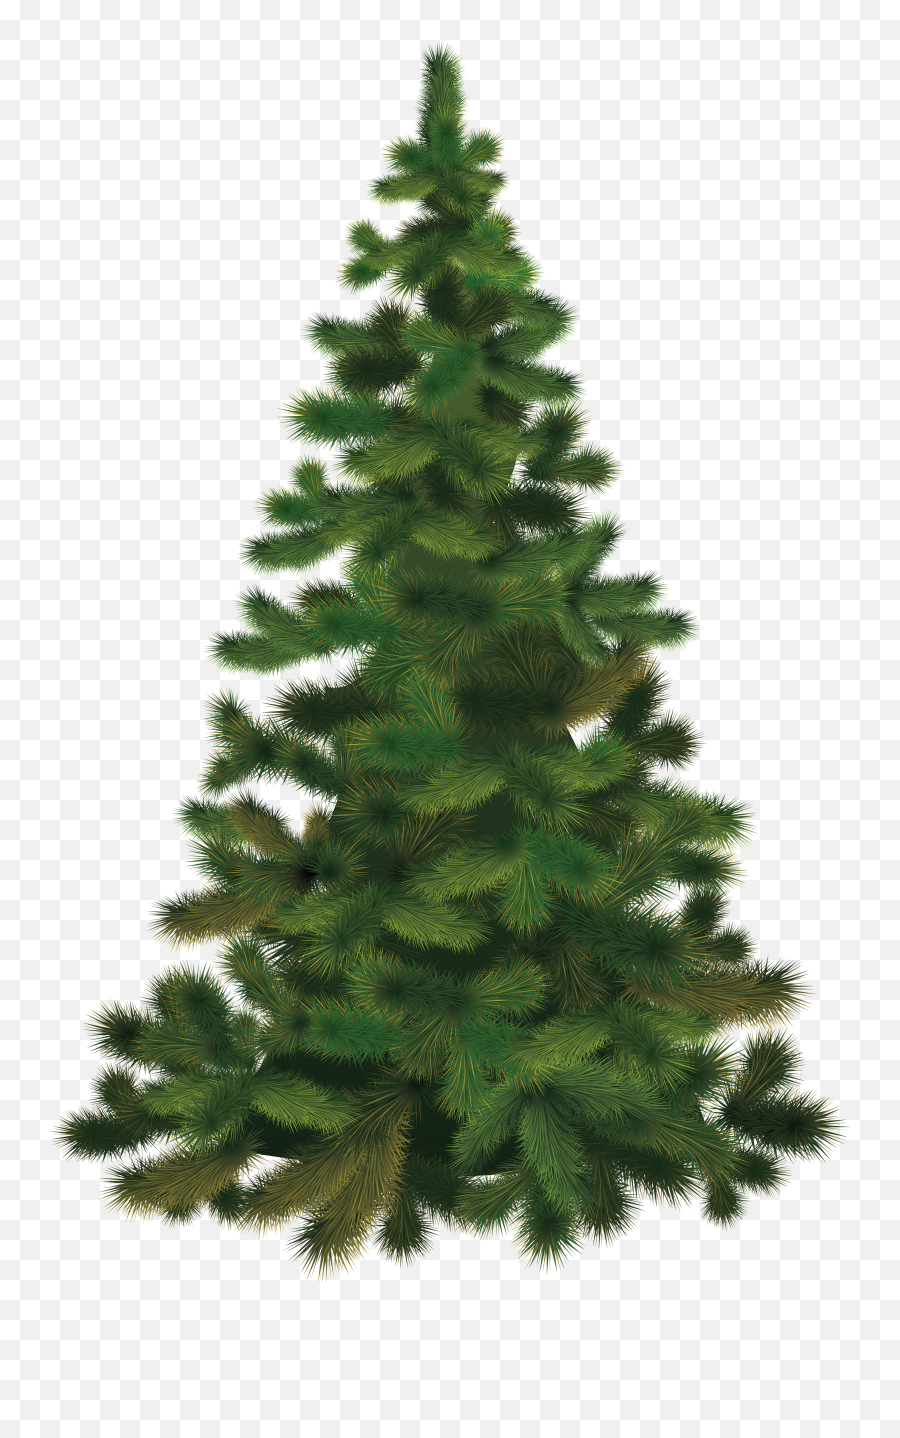 Pine Tree Evergreen Clip Art Png Transparent Background